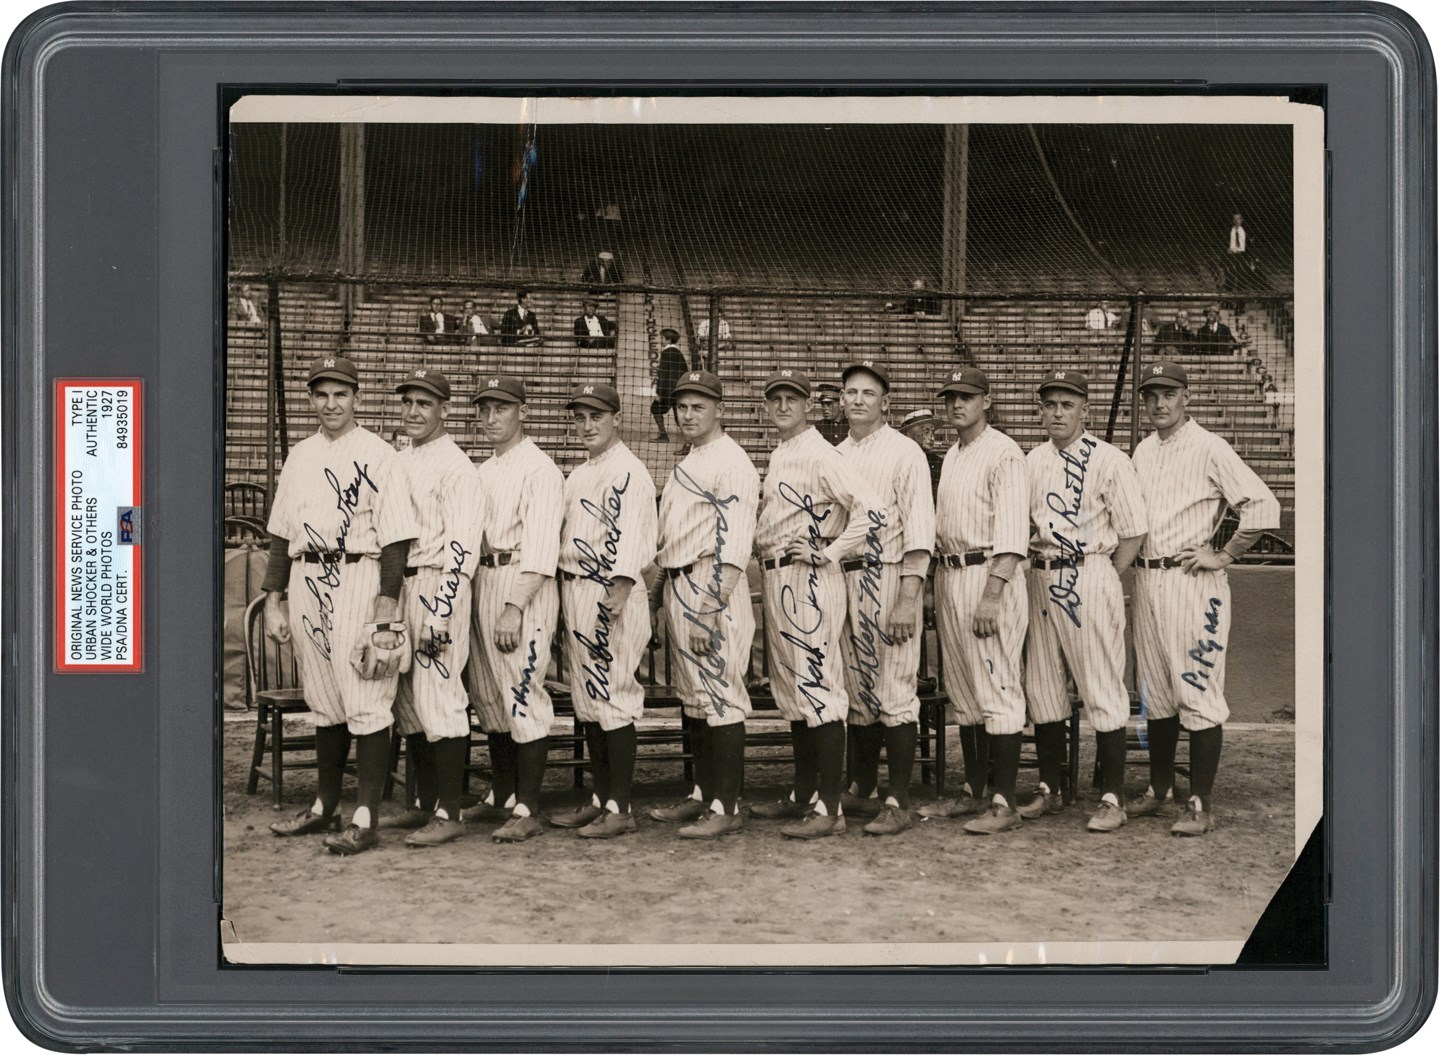 1927 New York Yankees Pitching Staff Signed Photograph with Shocker and Giard (PSA Type I with Authentic Signatures)